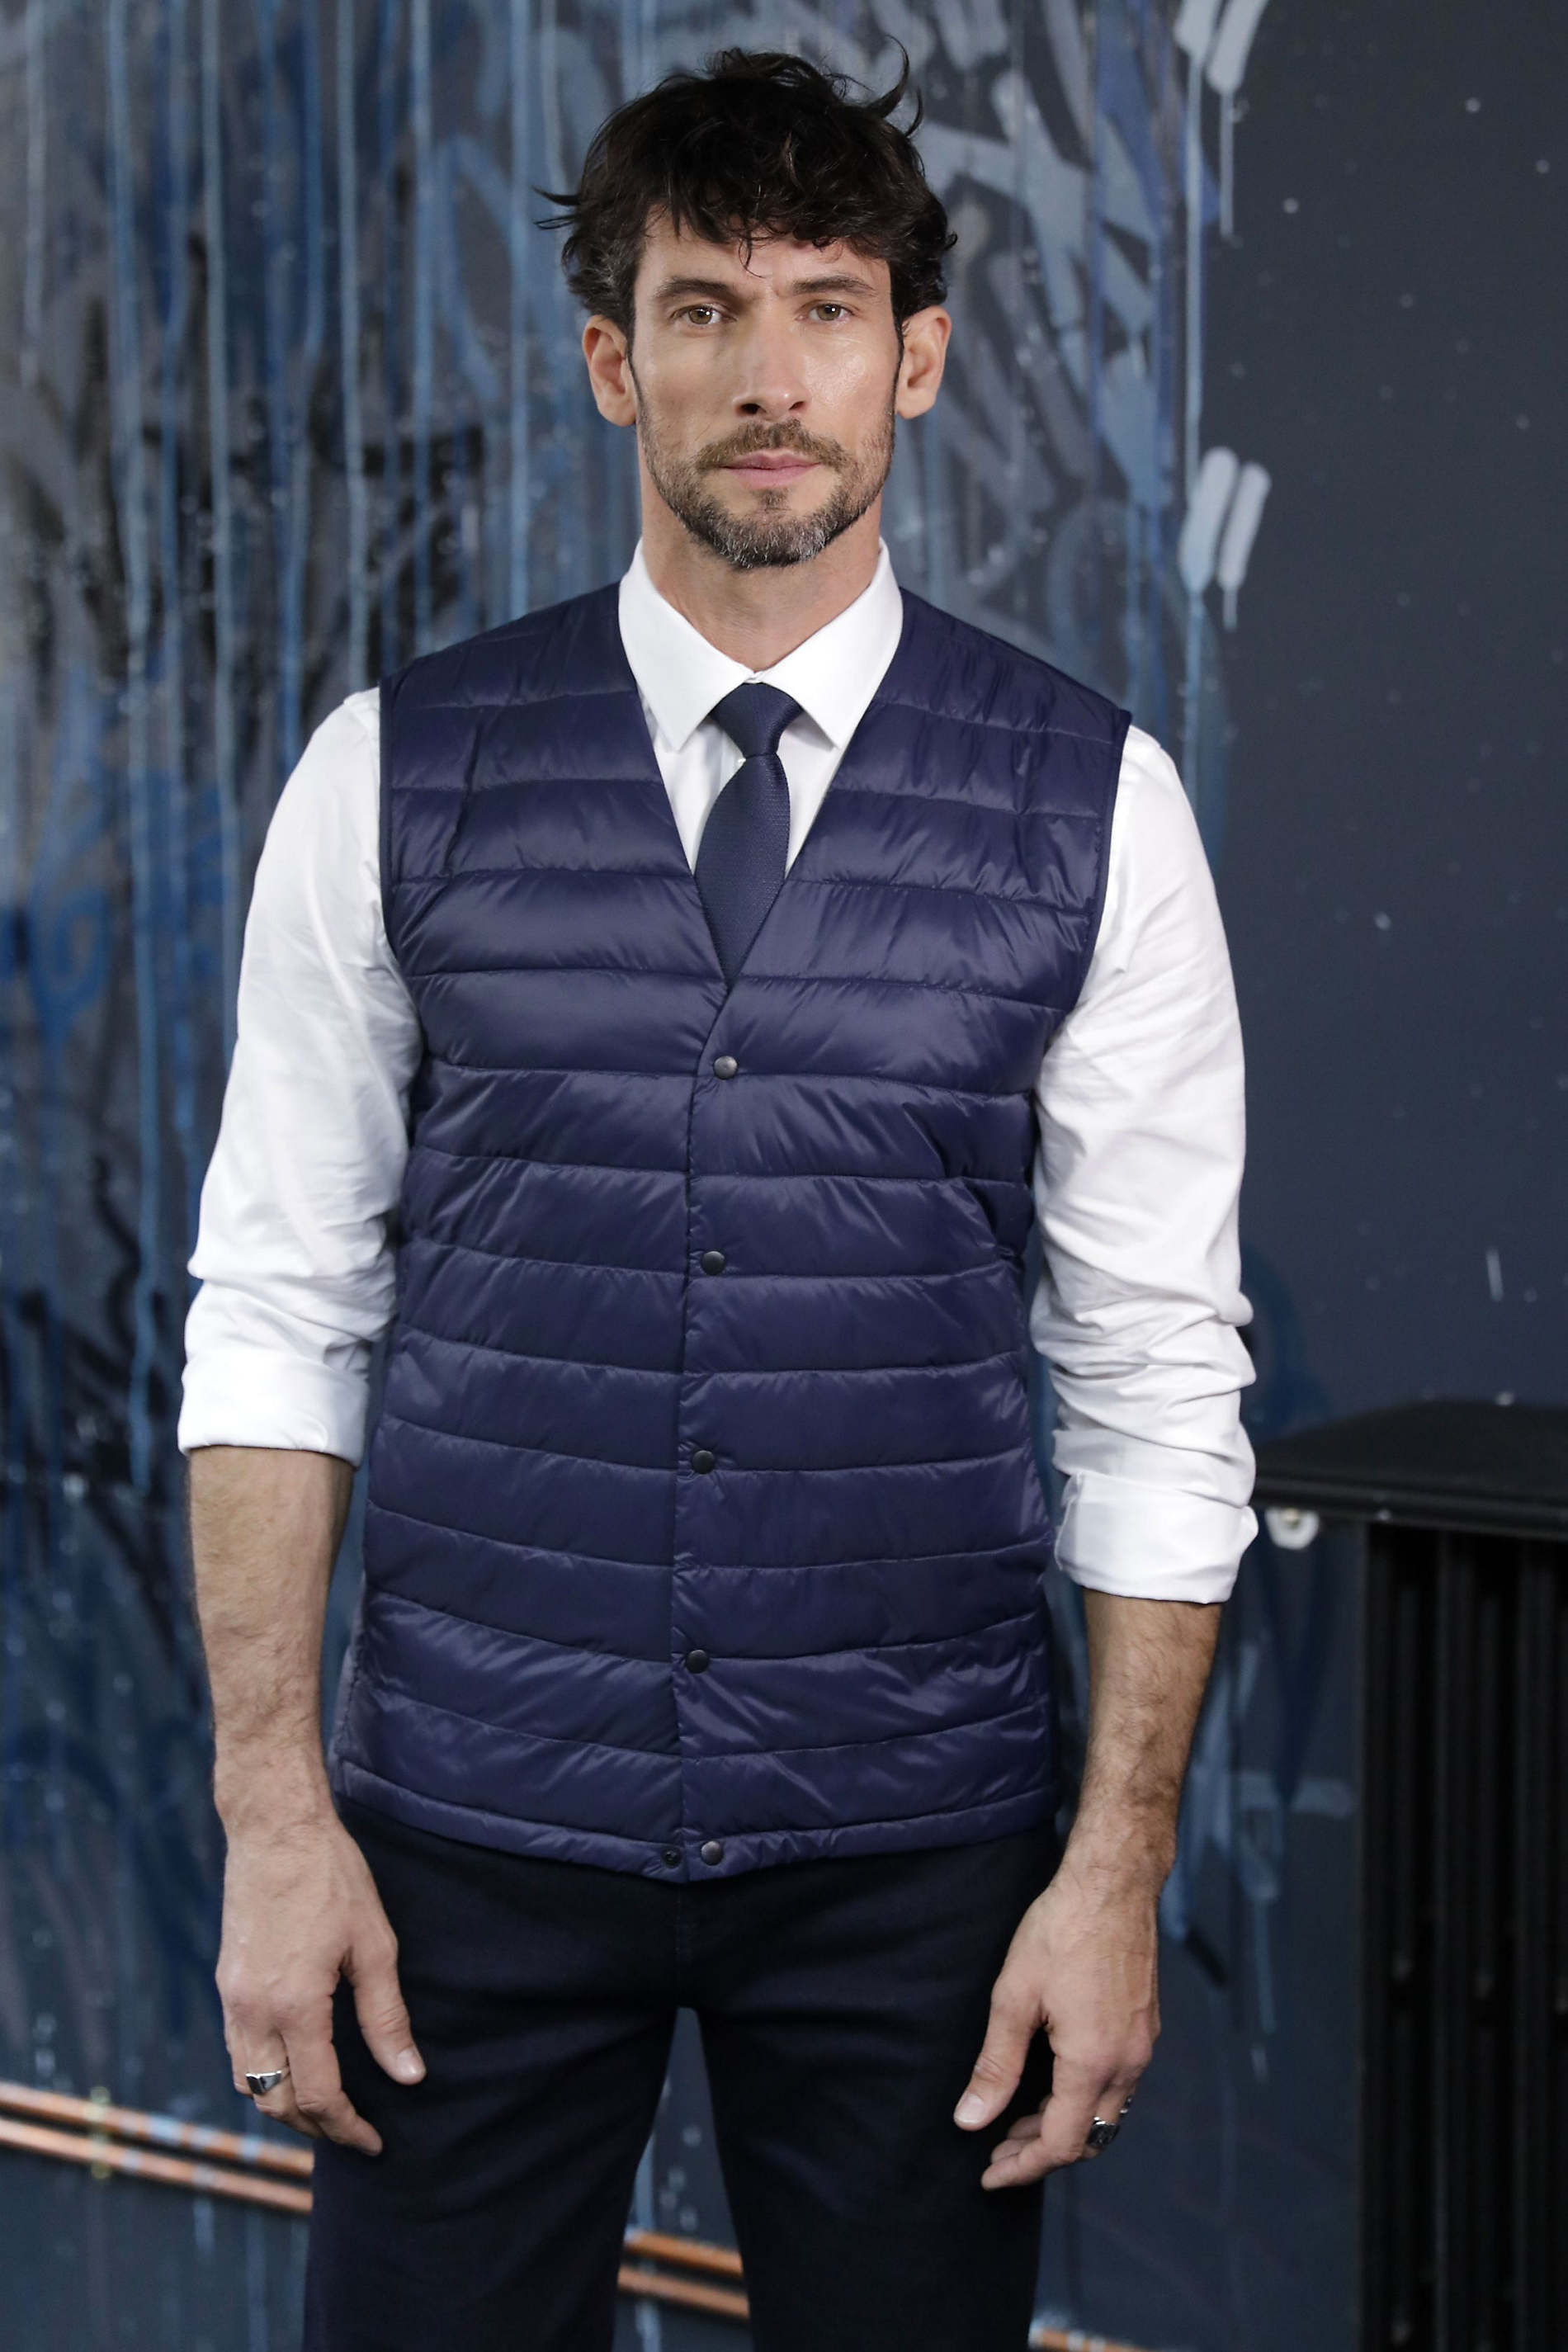 Men's lightweight bodywarmer<p>Ultralight and warm, this bodywarmer has been carefully designed to be suitable for all seasons and activities. It can be worn by itself or layered with other garments since it is quite thin. Bonus: it comes with a carry bag.<p> NEOBLU ARTHUR MEN